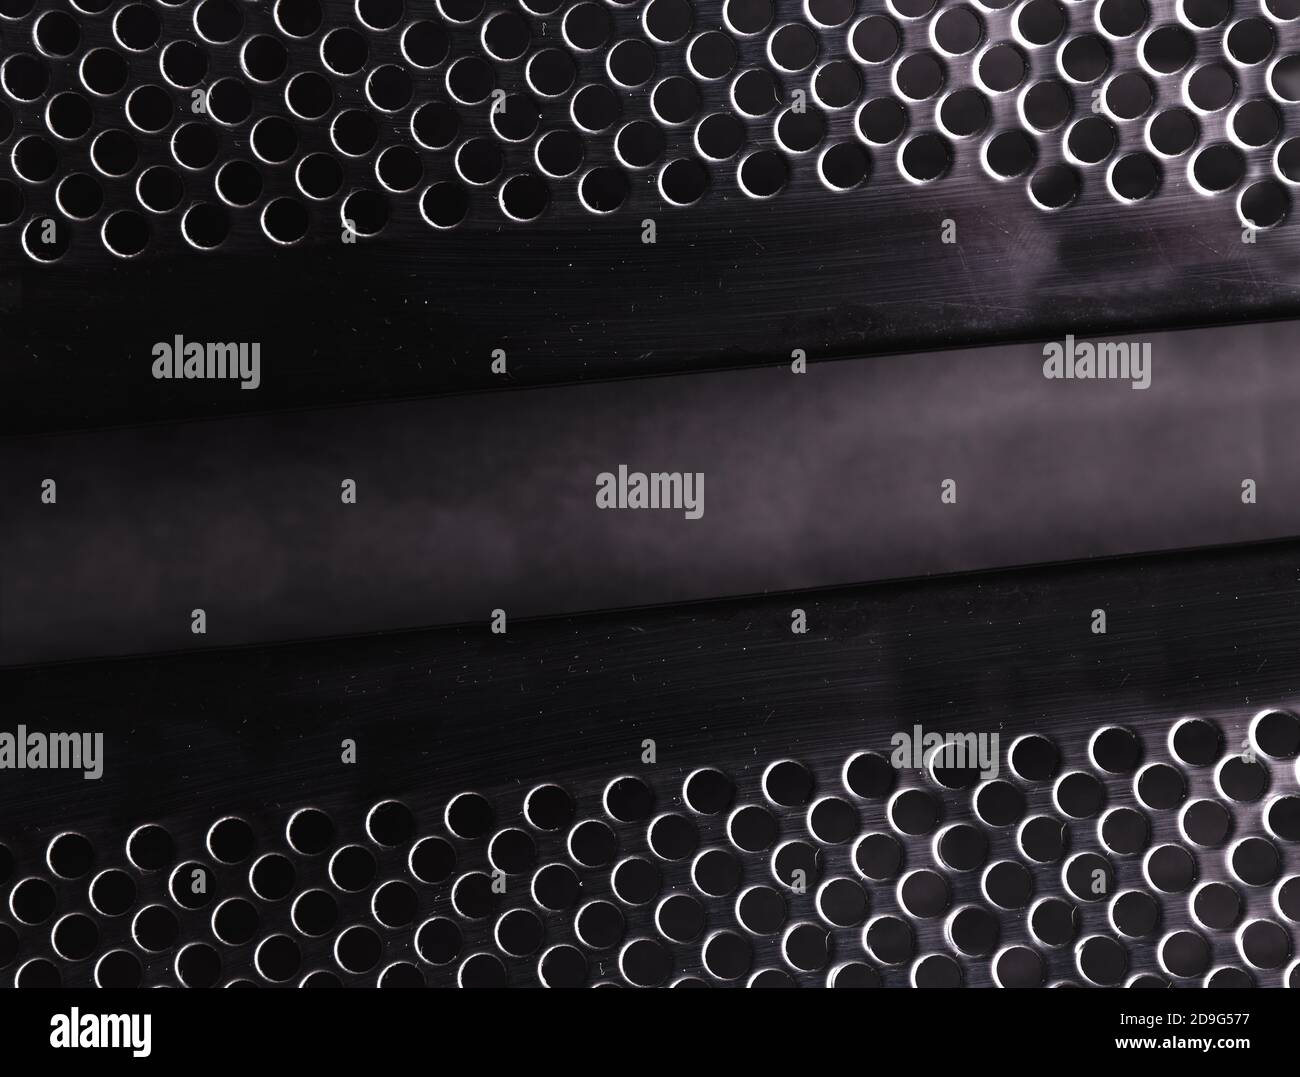 Front image of metal grille of amplifier or music loudspeaker.Metal mesh  surface background Stock Photo - Alamy